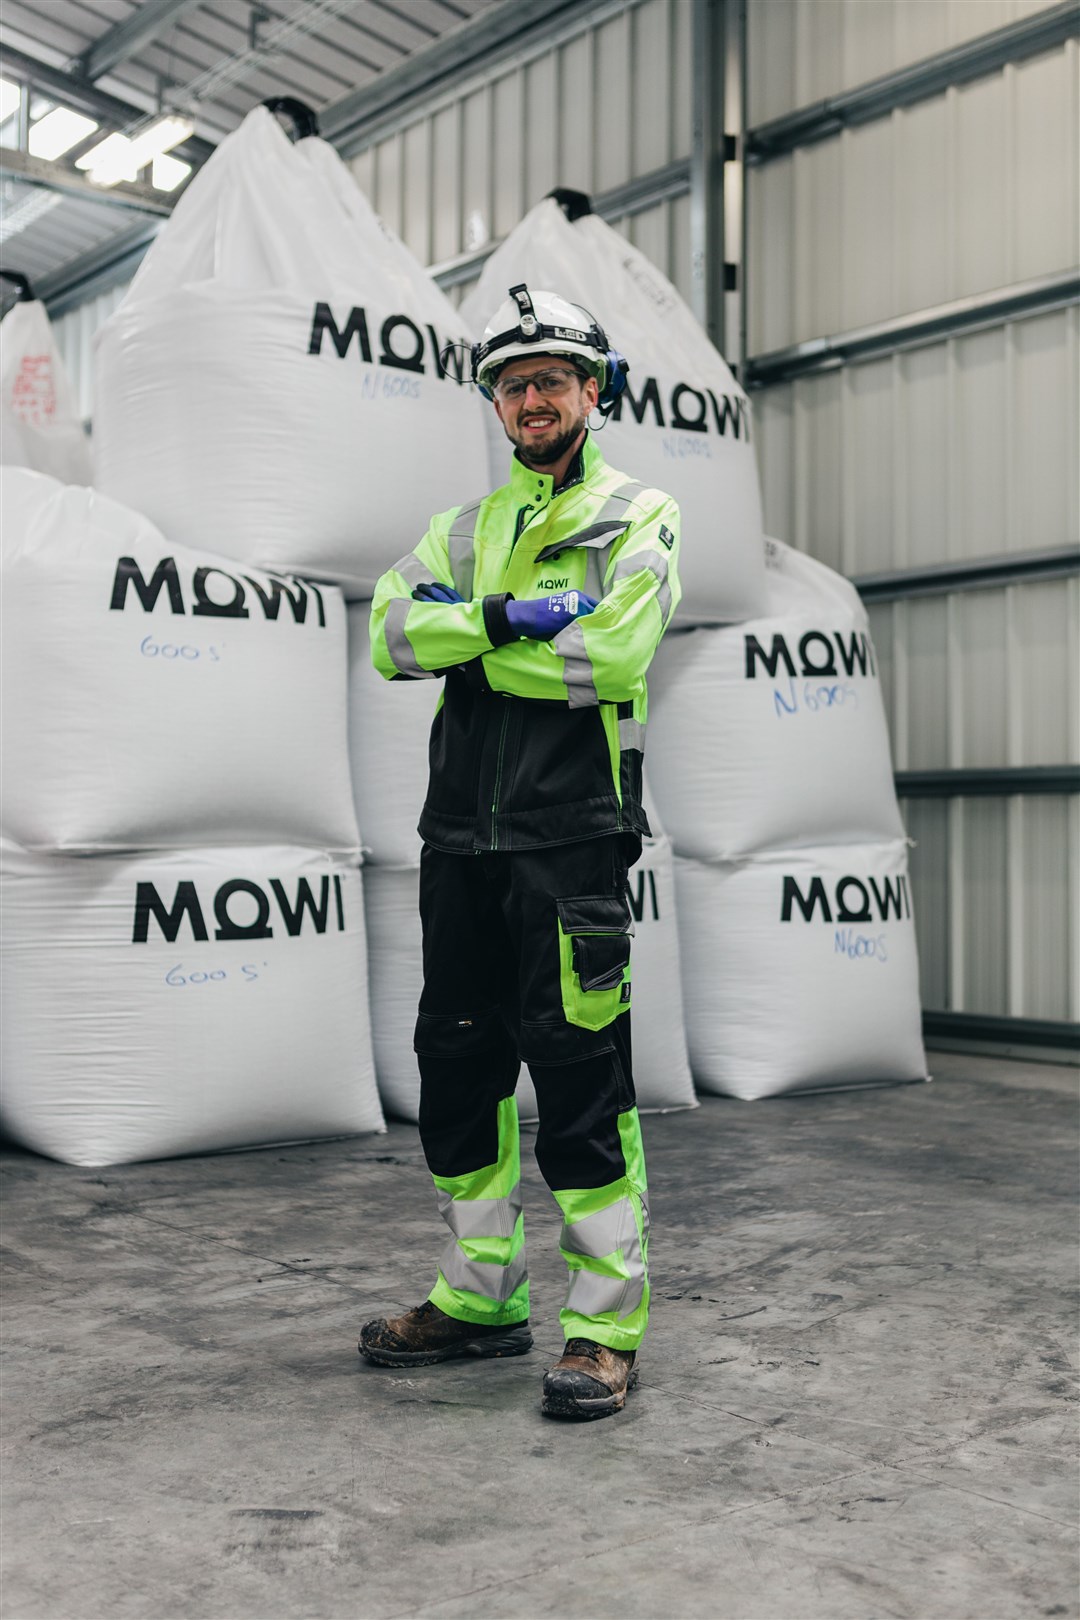 Mowi employee Chris MacRae inside the feed mill in front of bags of fish feed produced there.